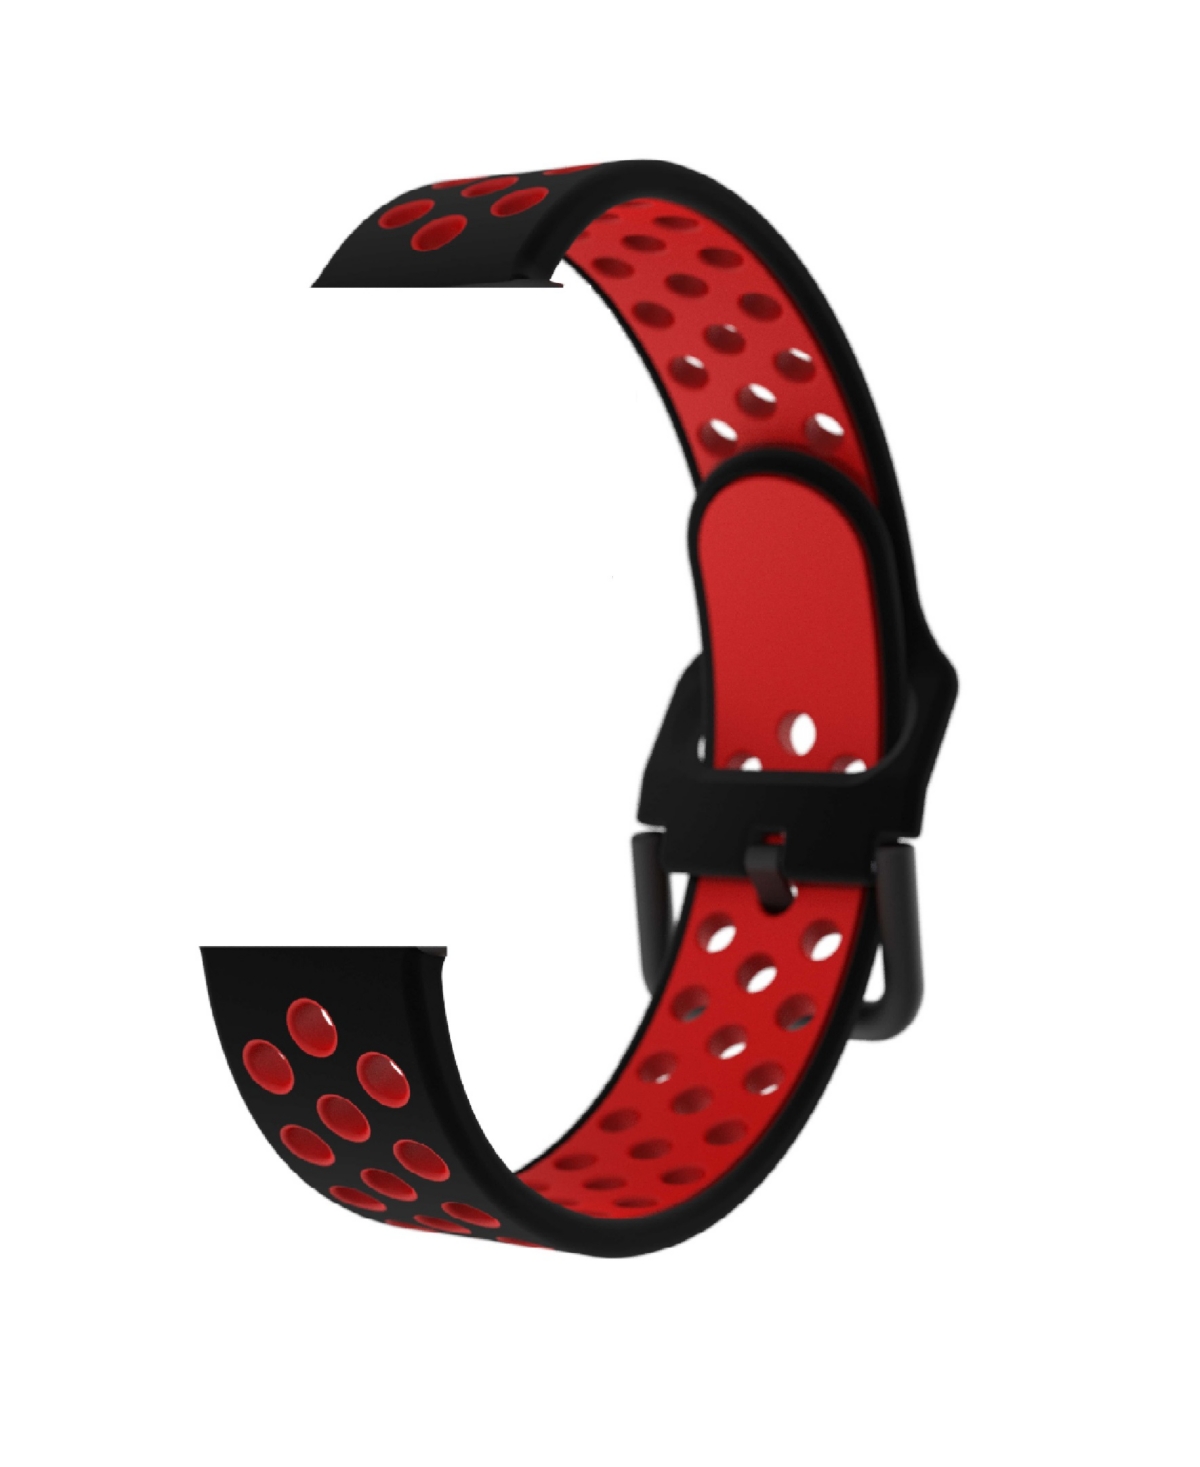 Air 3 44mm Unisex Black and Red Interchangeable Silicone Strap - Black, Red